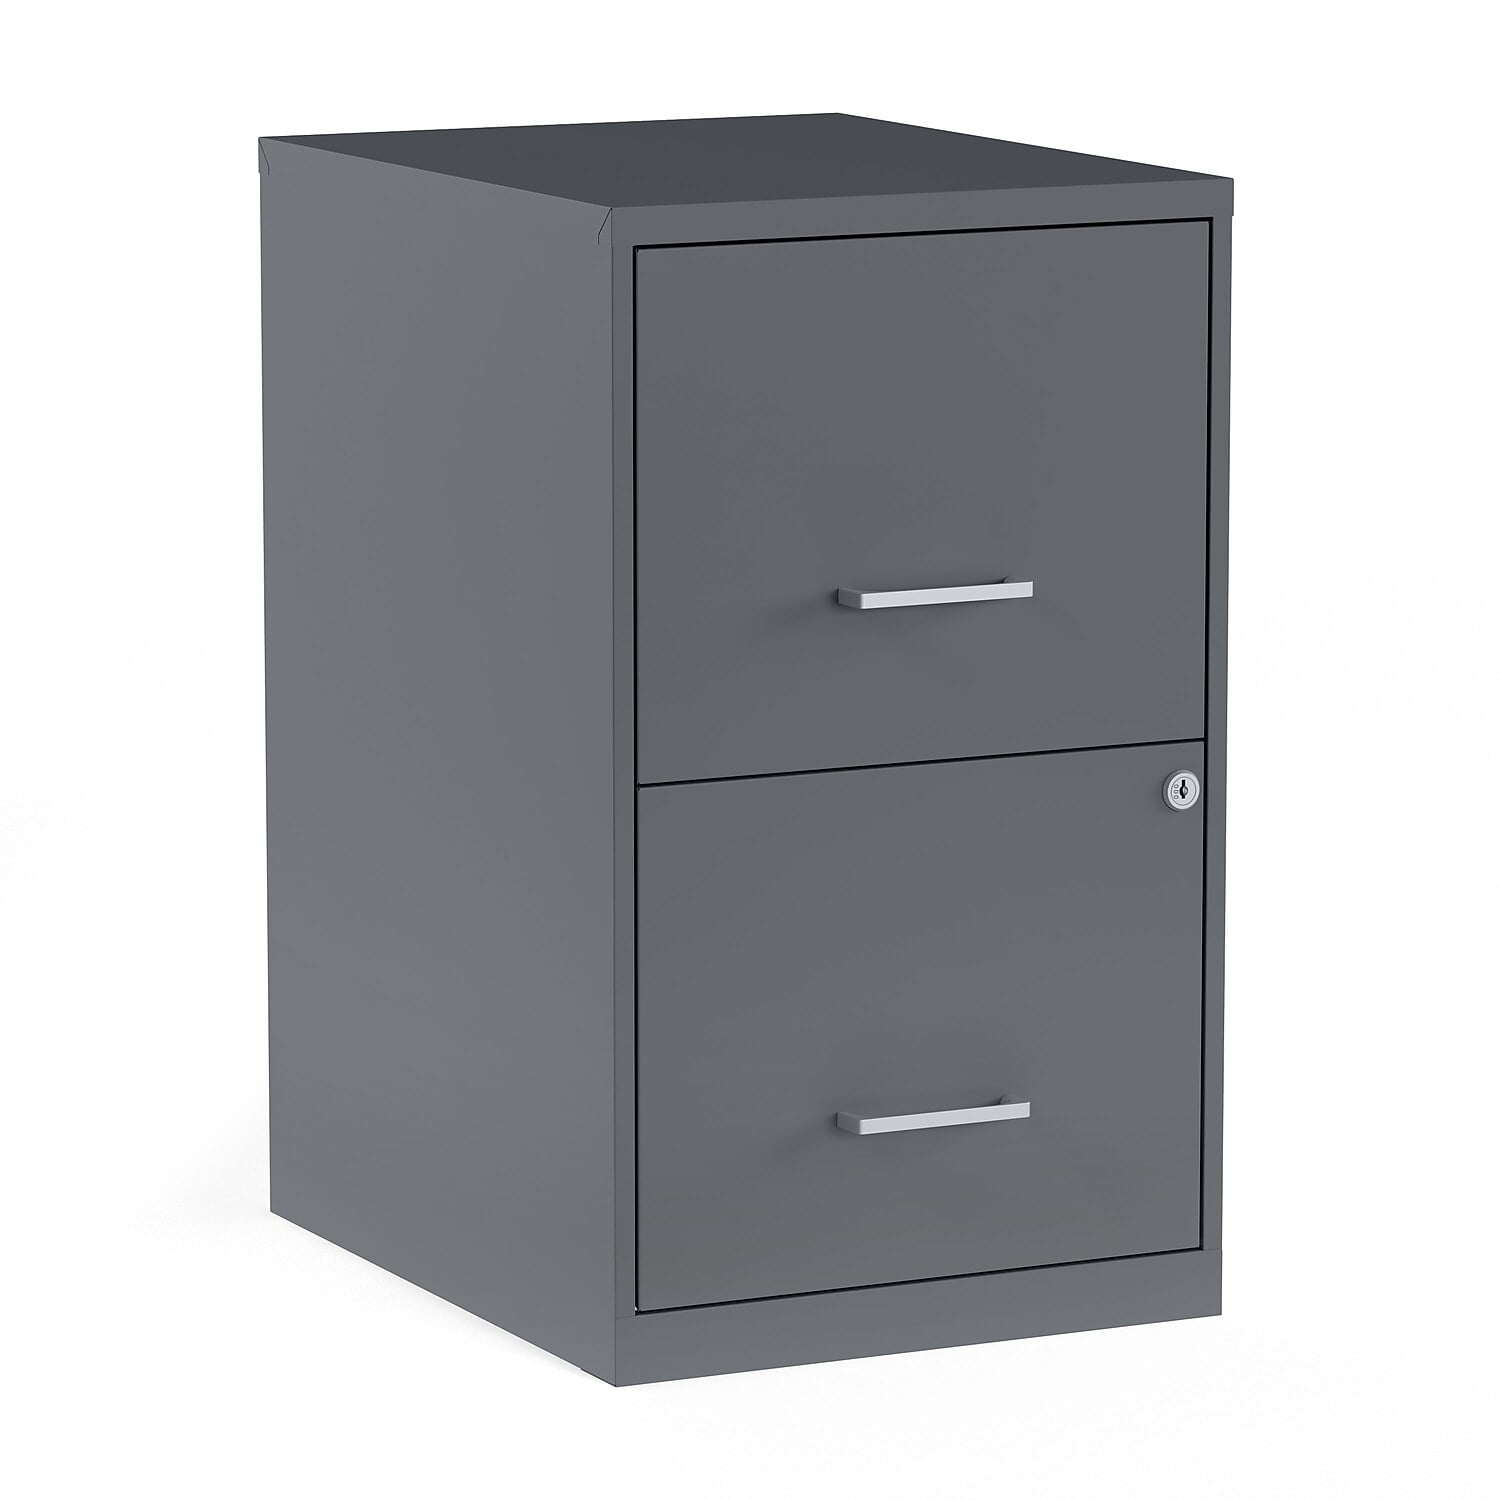 Pemberly Row 3 Drawer File Cabinet in Charcoal